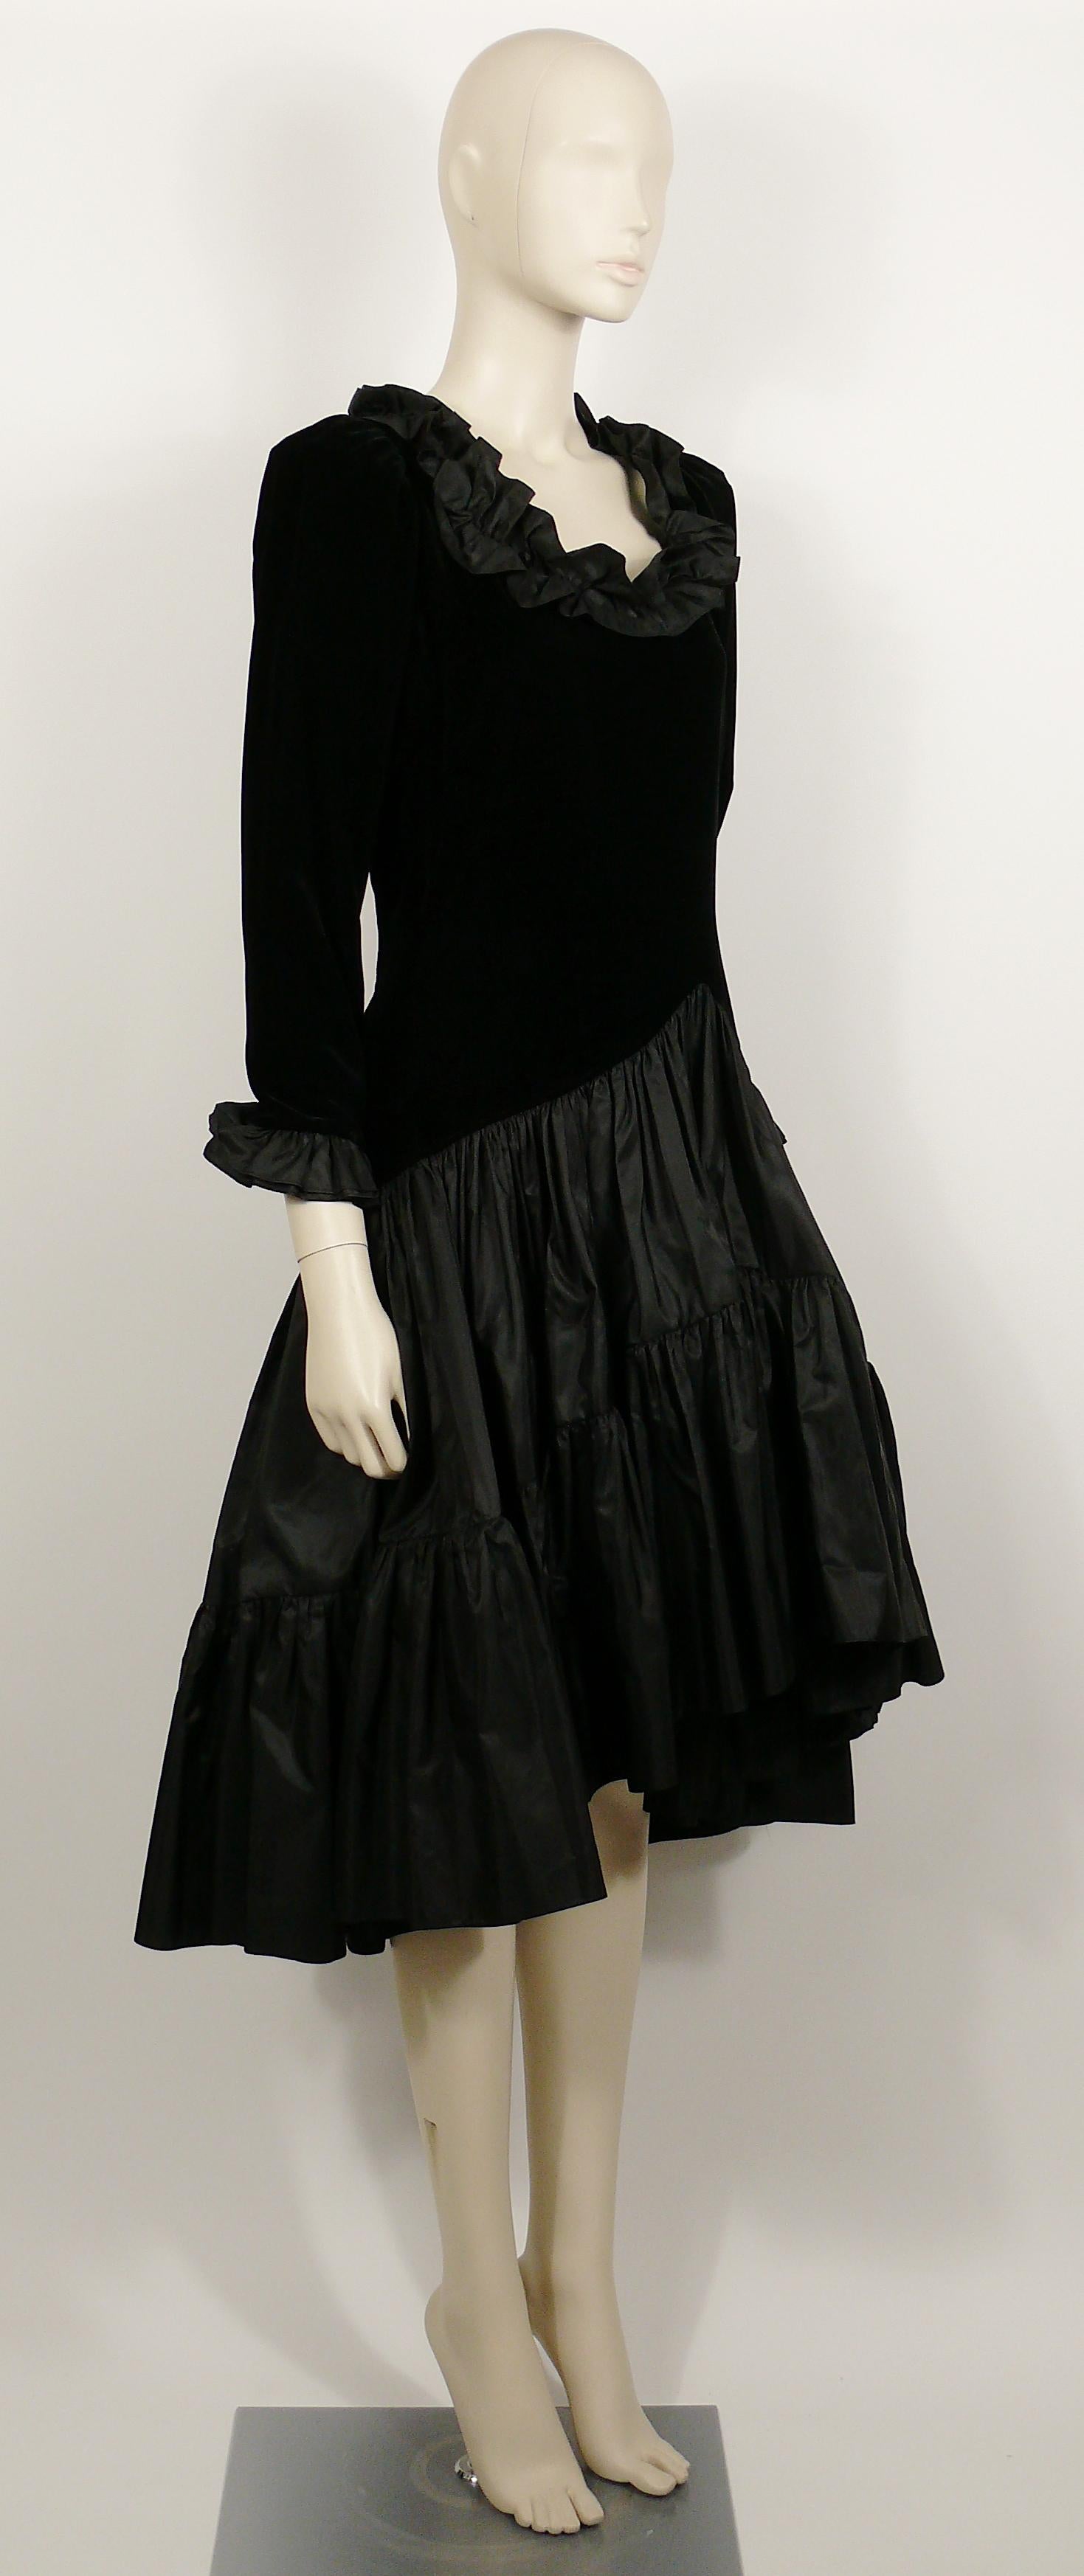 YVES SAINT LAURENT Rive Gauche vintage black velvet high low skirt cocktail dress featuring double layered black satin ruffles around the neckline and wrists.

The left side fastens with a hidden zipper.
Fully lined.

Label reads SAINT LAURENT Rive